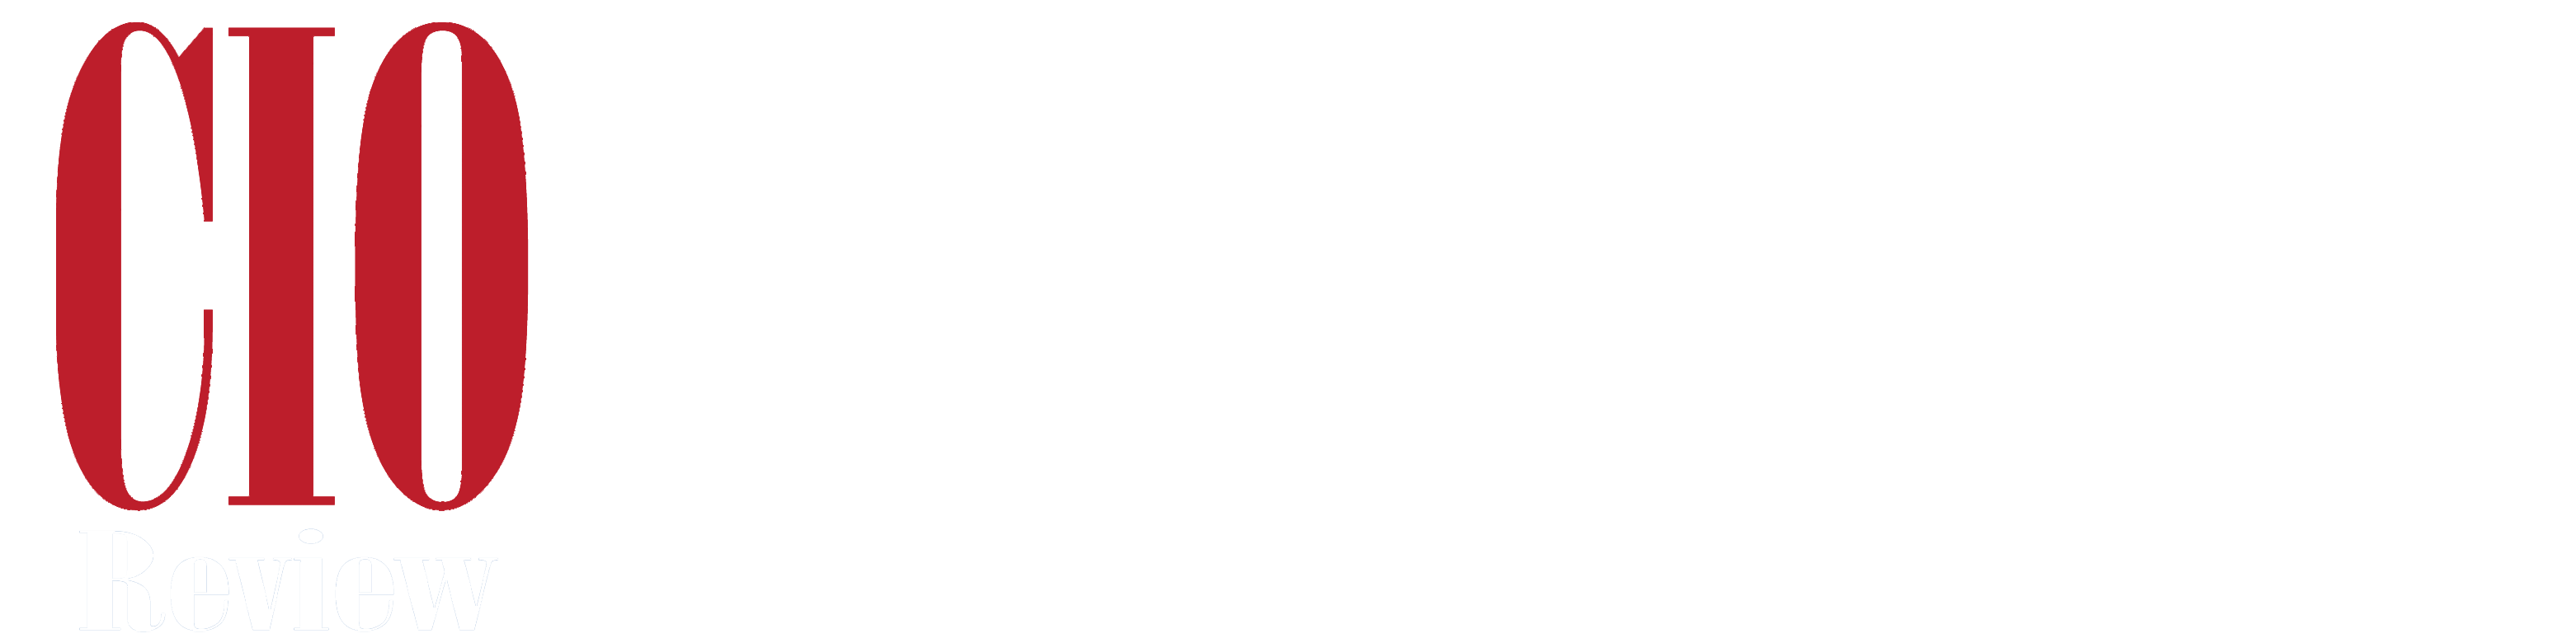 CIO Review 20 Most Promising Gamification Technology Solution Providers